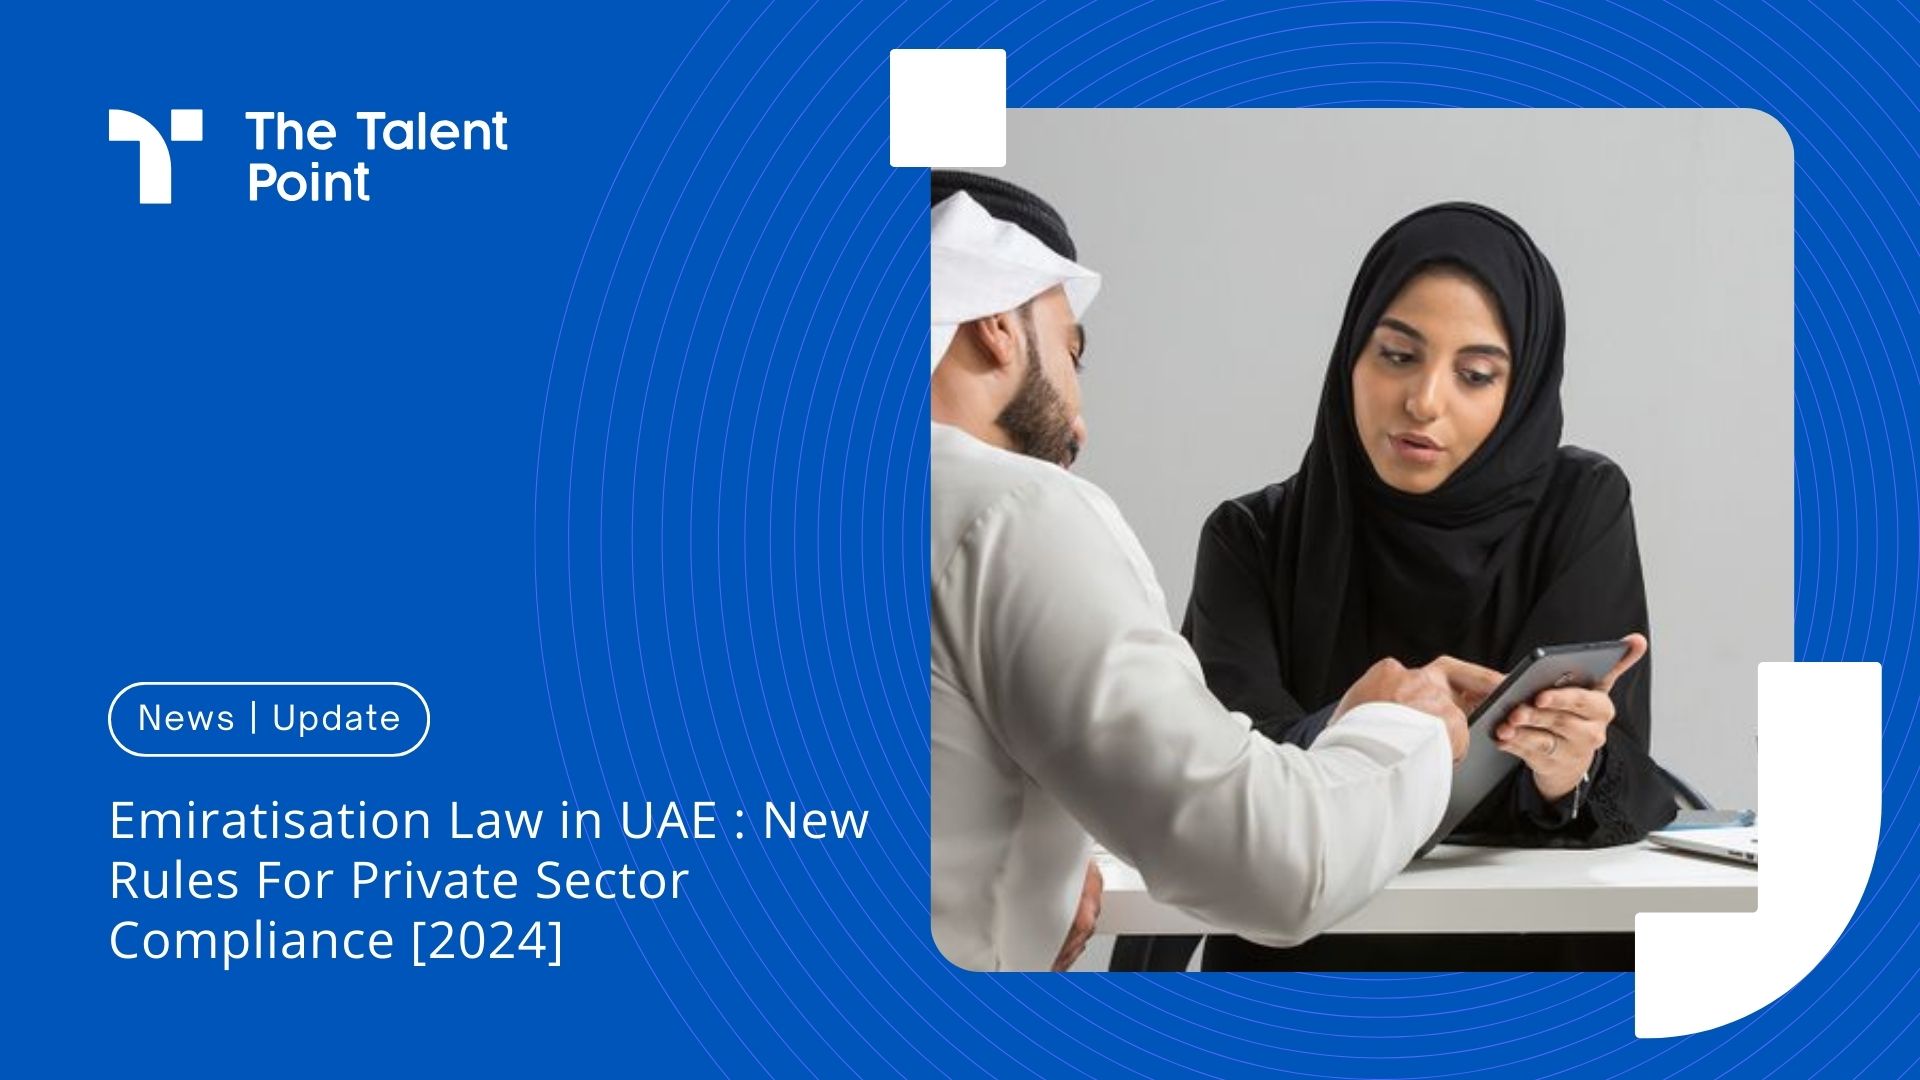 Emiratisation Law in UAE : New Rules For Private Sector Compliance [2024] - TalentPoint